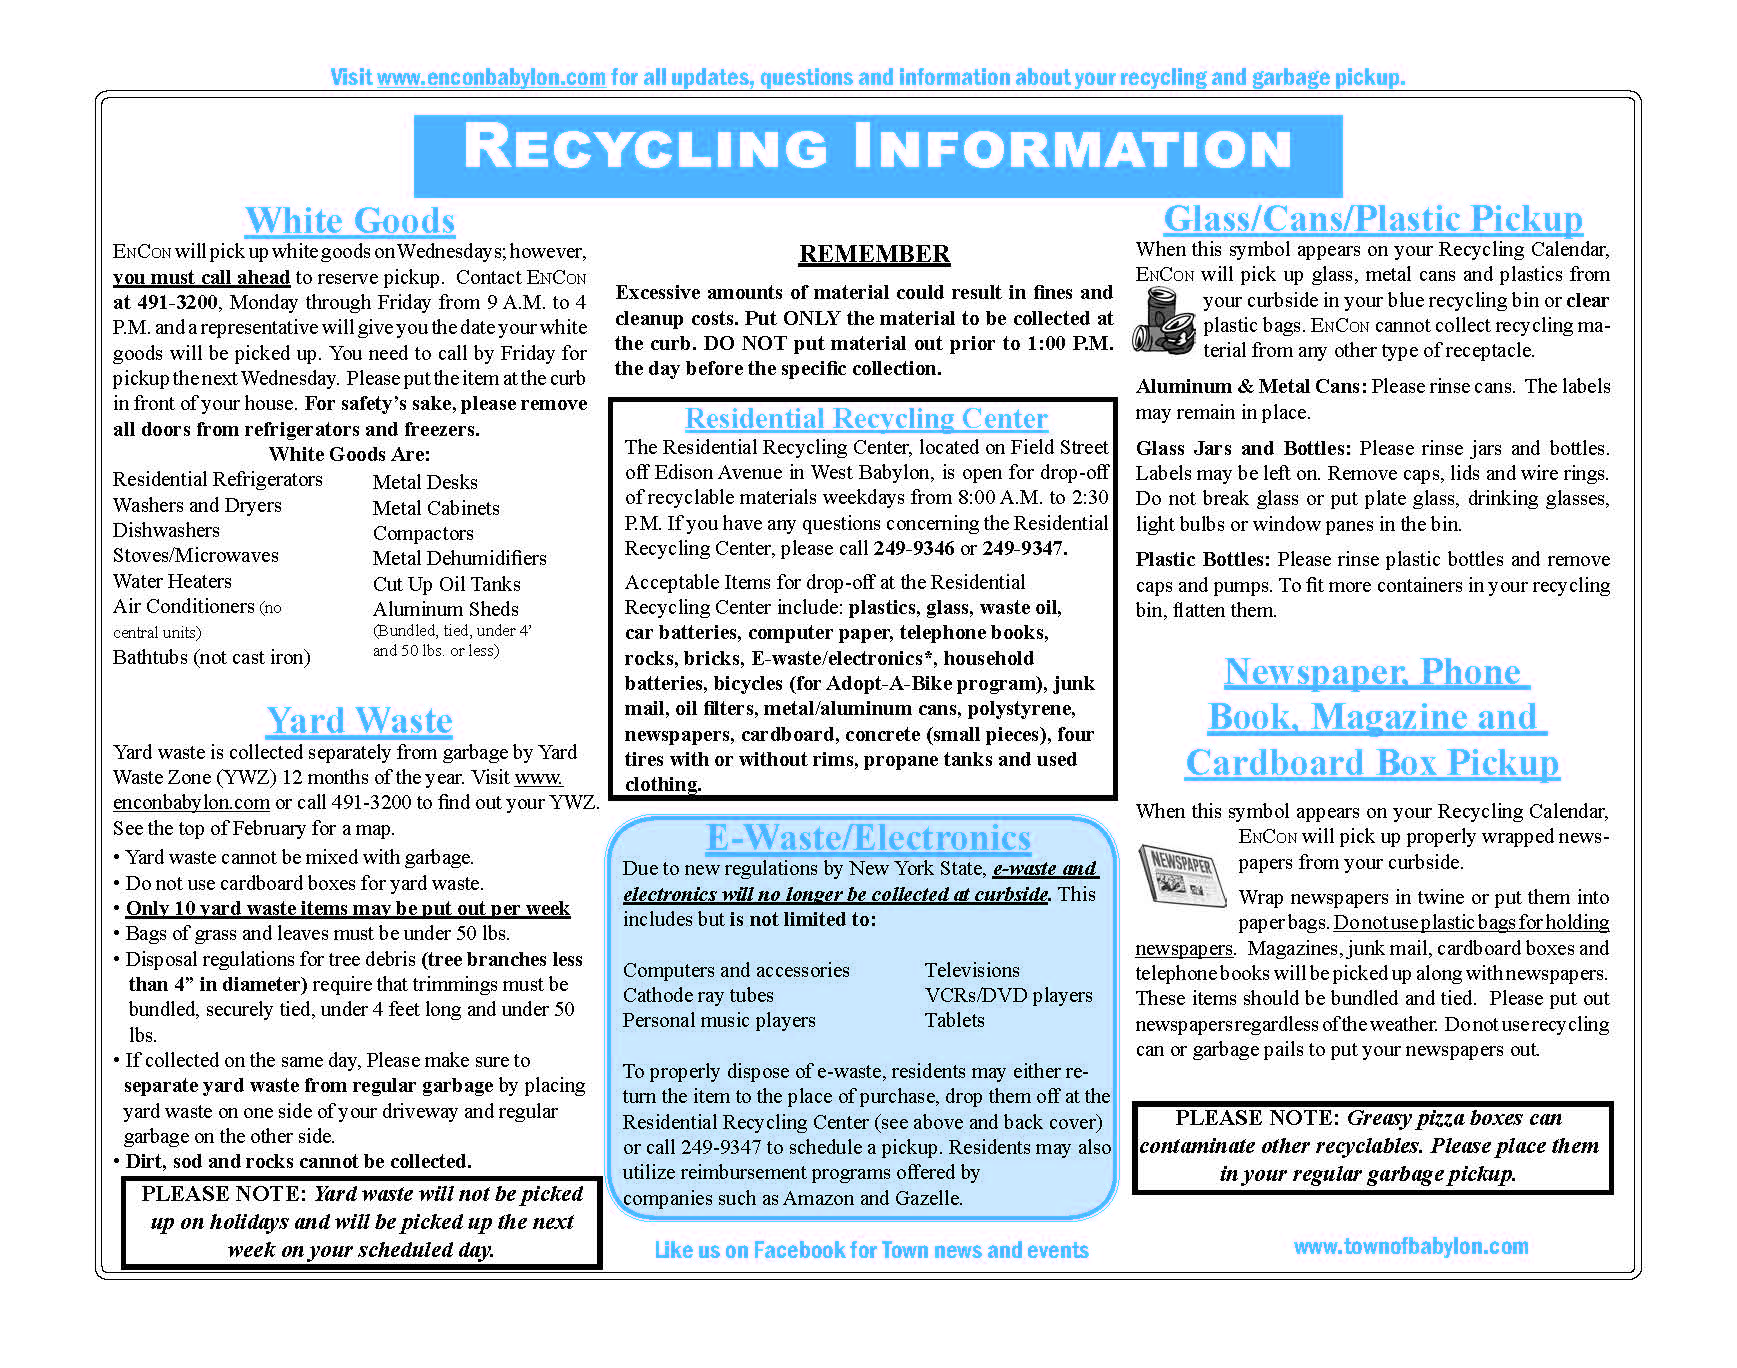 babylon chart for recycling